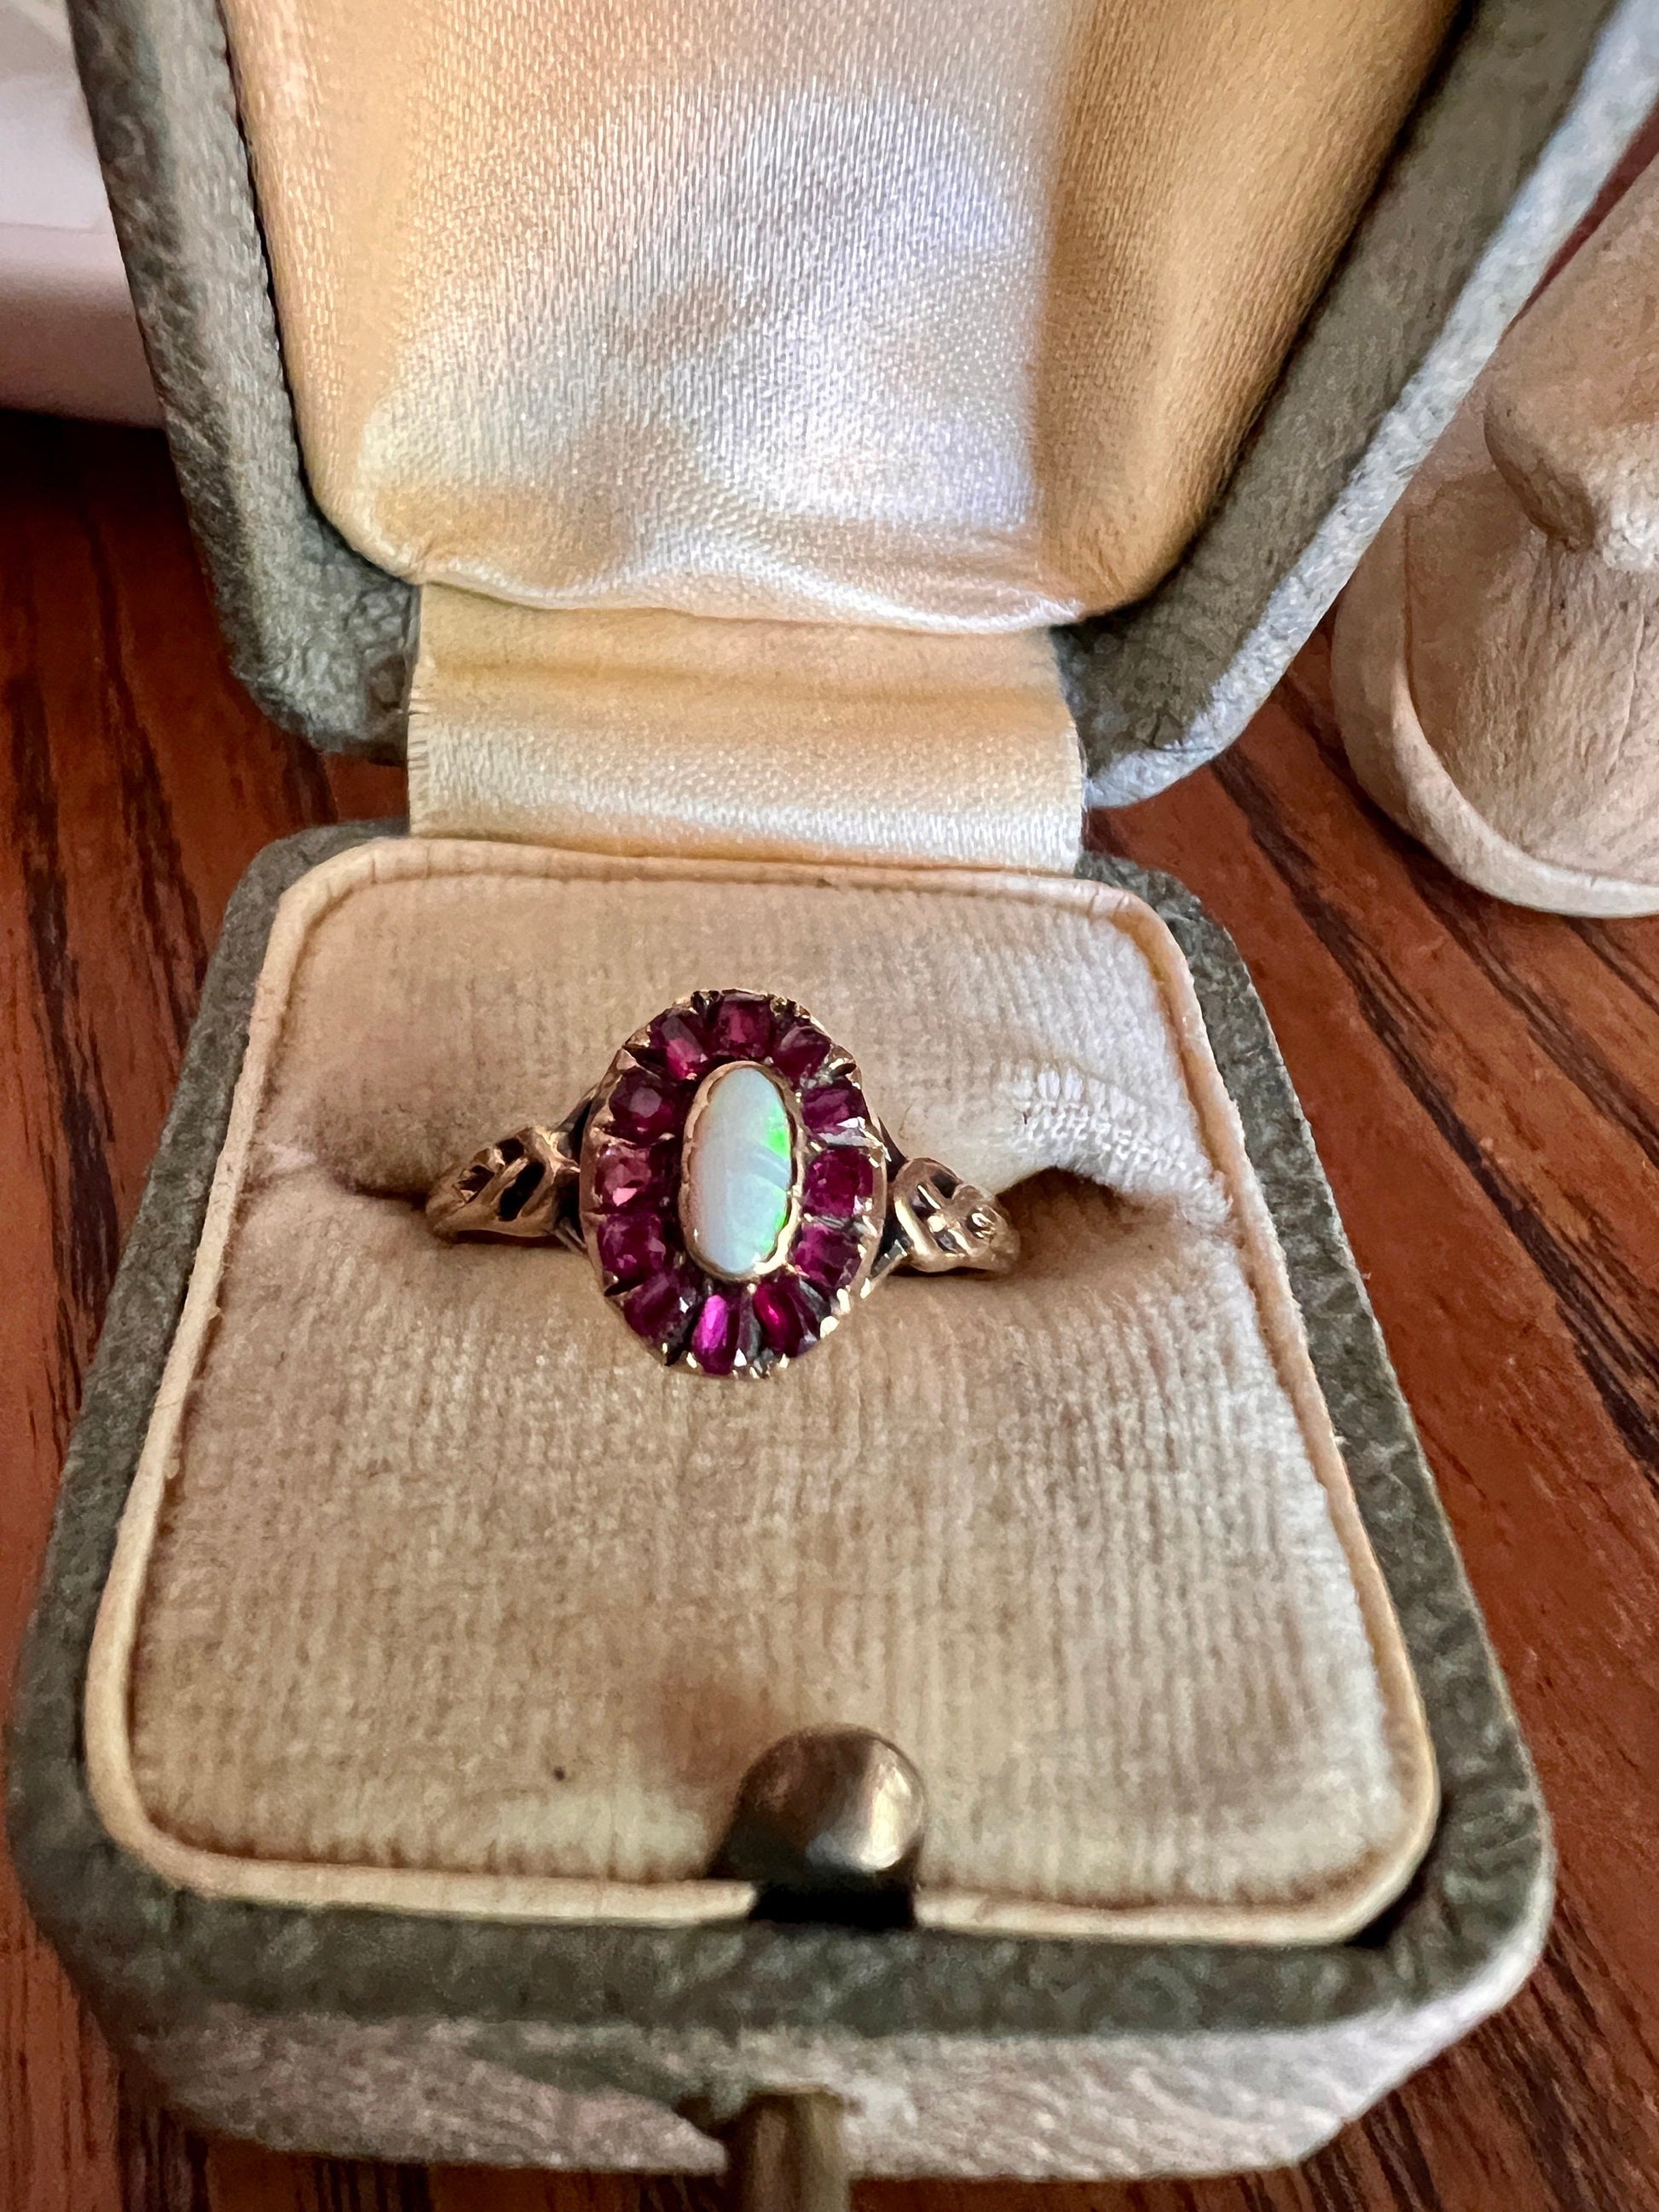 Dainty French Victorian 18k Gold Old Cut RUBY Halo OPAL Ring Antique Braided Shoulders Belle Epoque Art Nouveau Romantic Gift Stacker Pink